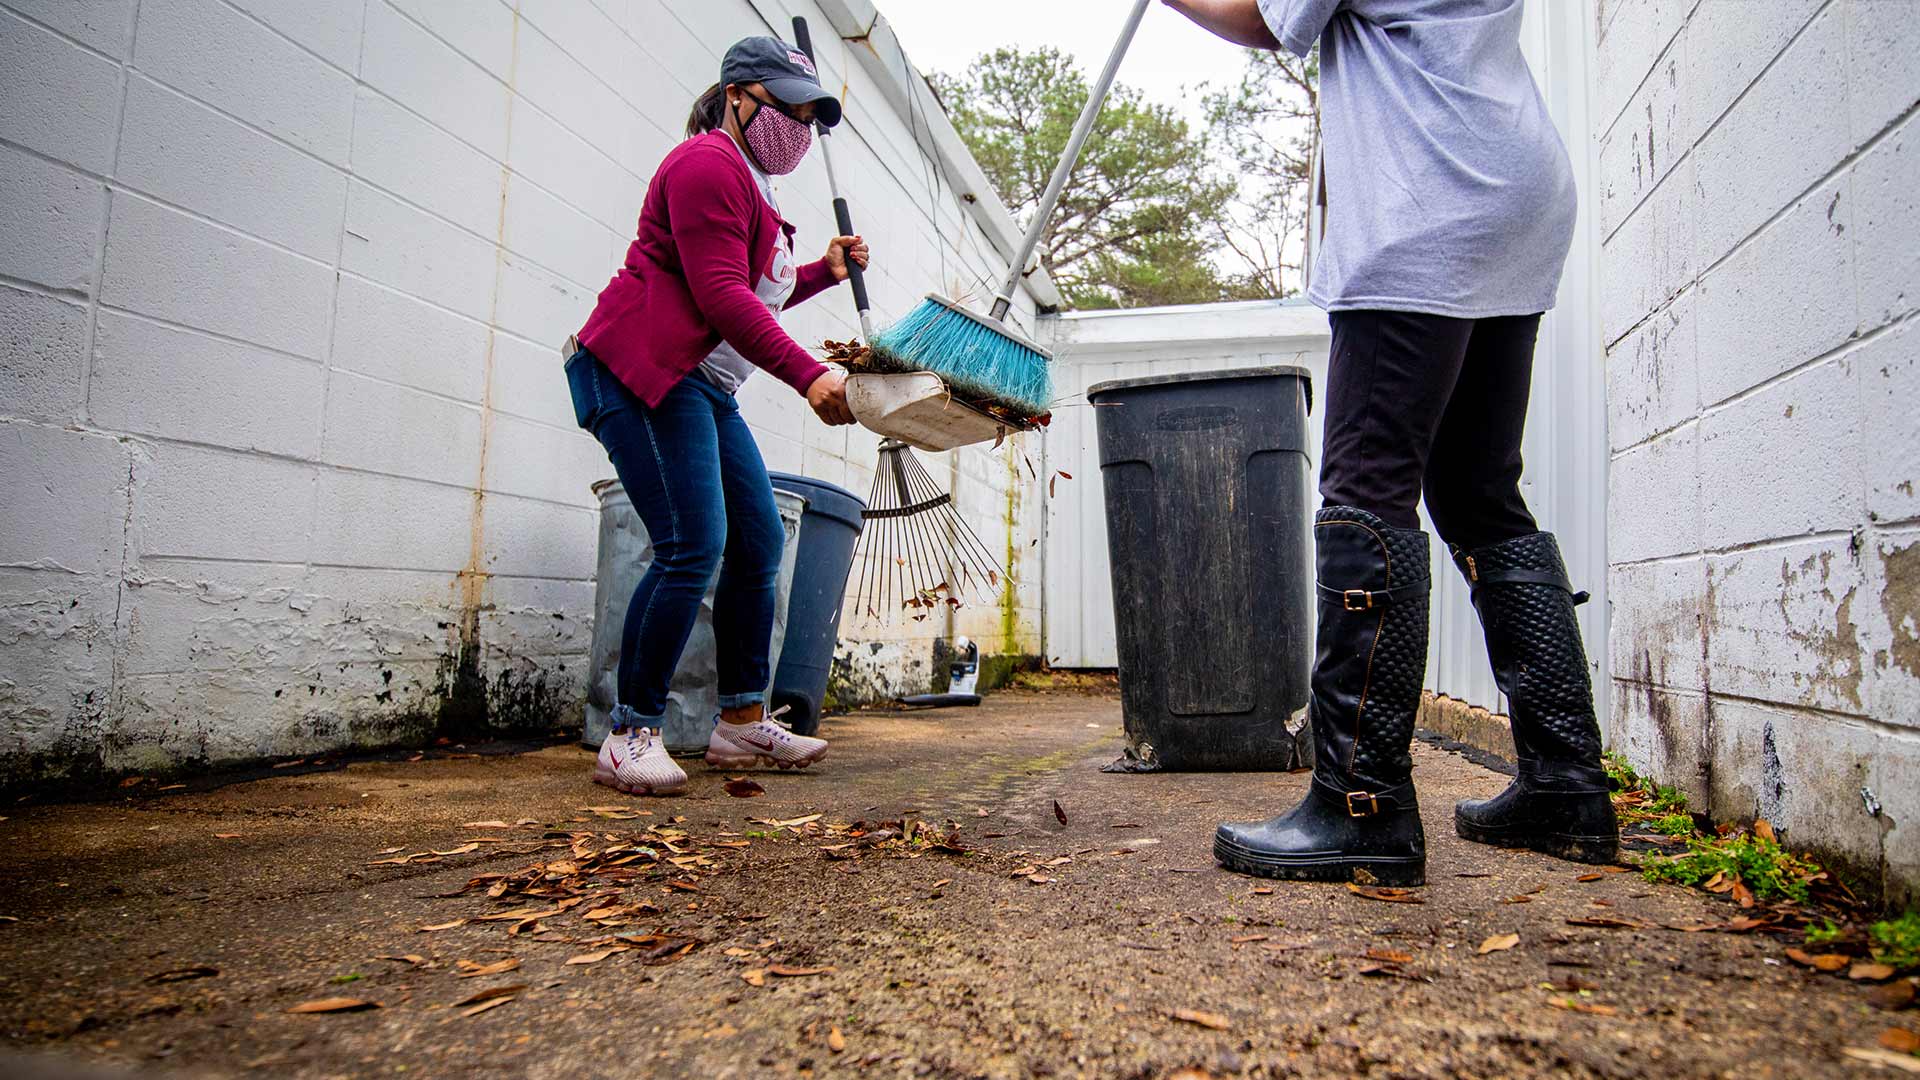 Christy Laster, left, and Cassandra Ellis work together to clear an area of leaves and pine needles.